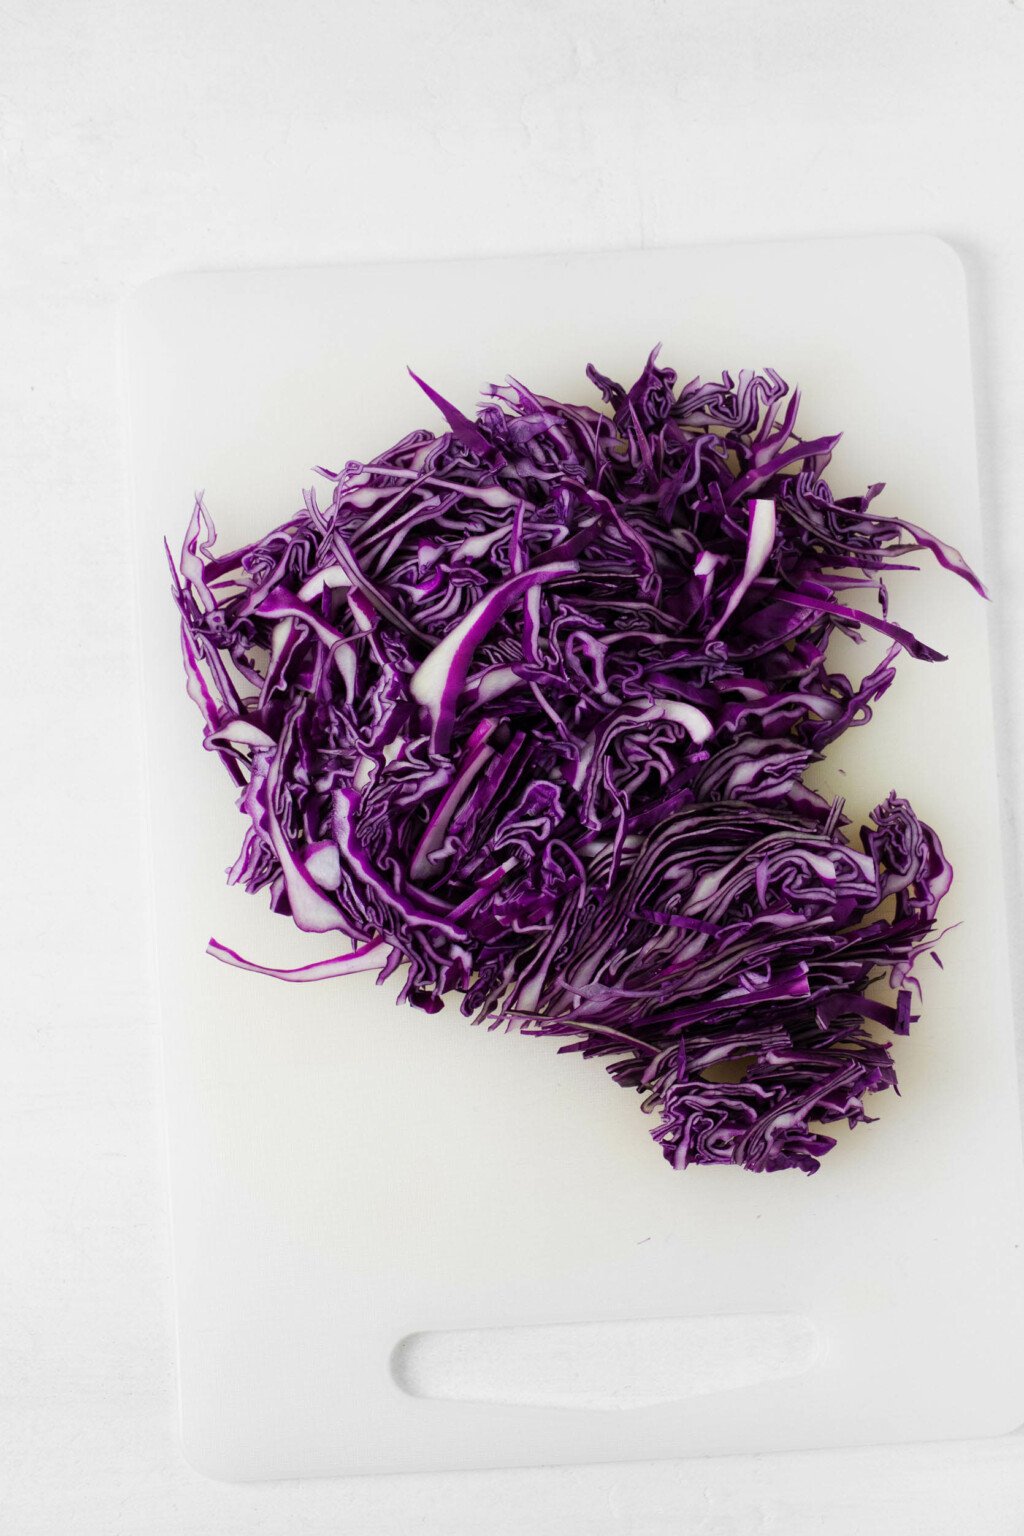 Shredded red cabbage is pictured on a small, white cutting board. 